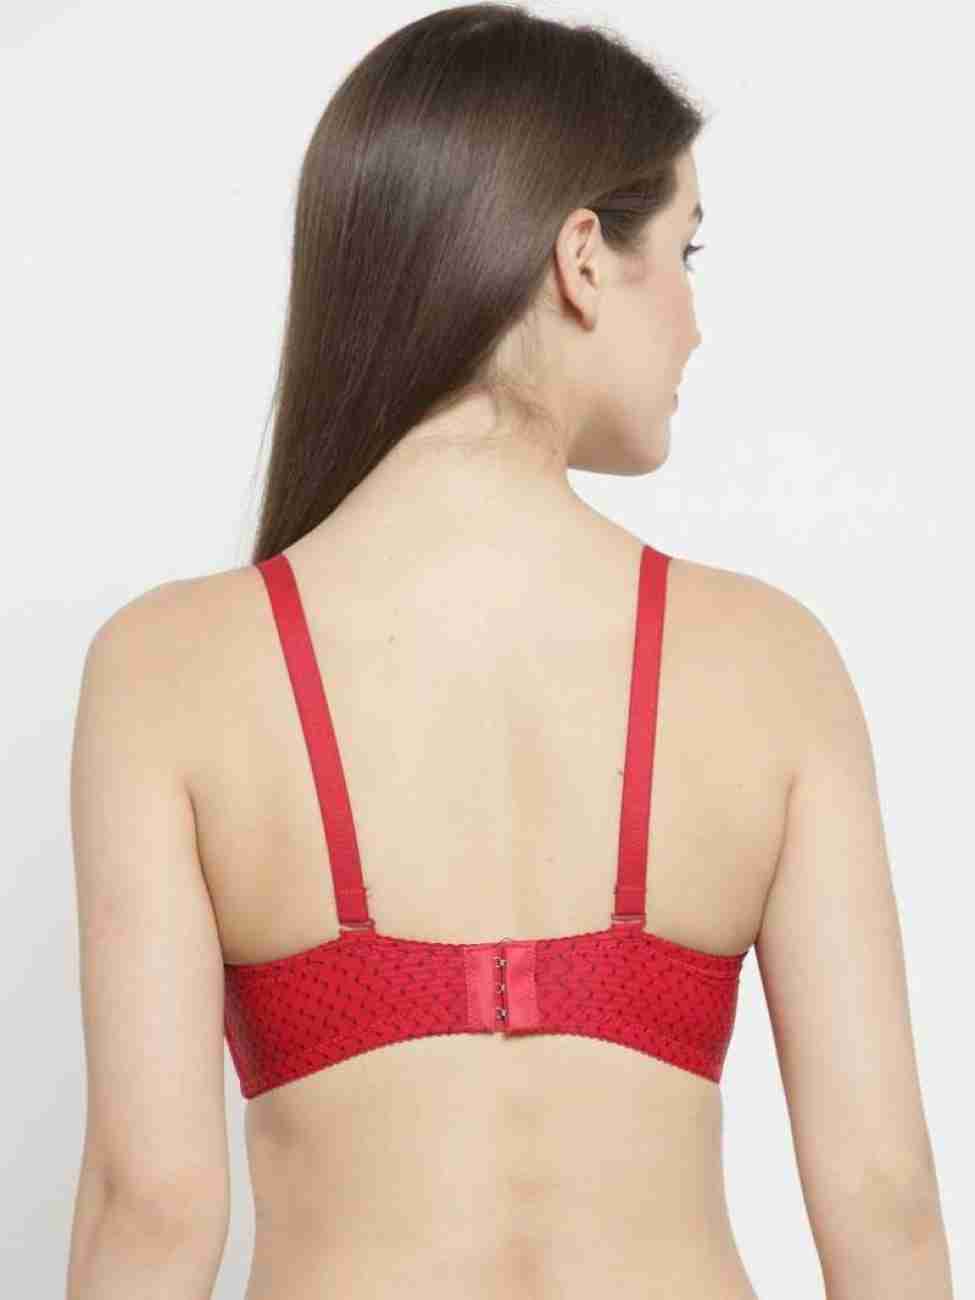 PLUMBURY Seamless Lightly Padded Push Up Bra Women Push-up Lightly Padded  Bra - Buy PLUMBURY Seamless Lightly Padded Push Up Bra Women Push-up Lightly  Padded Bra Online at Best Prices in India